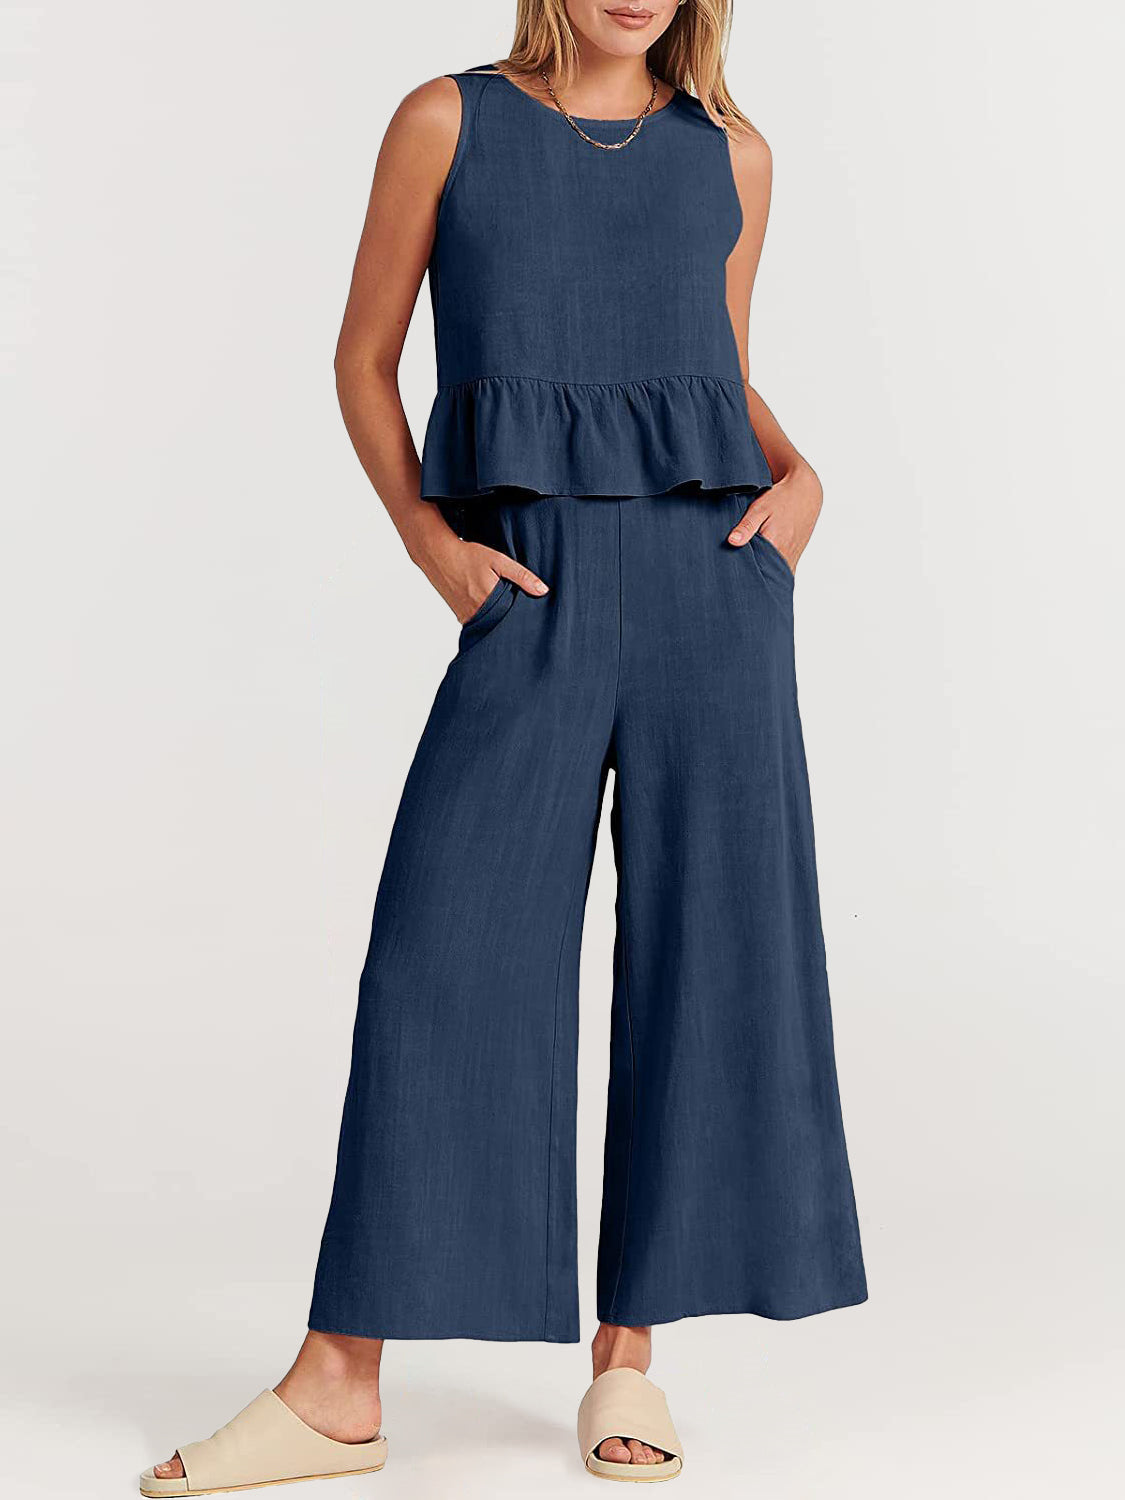 NTG Fad Two Pieces Sets Navy blue / S(4-6) Two Piece Outfits Sleeveless Top and Wide Leg Pants Lounge Set